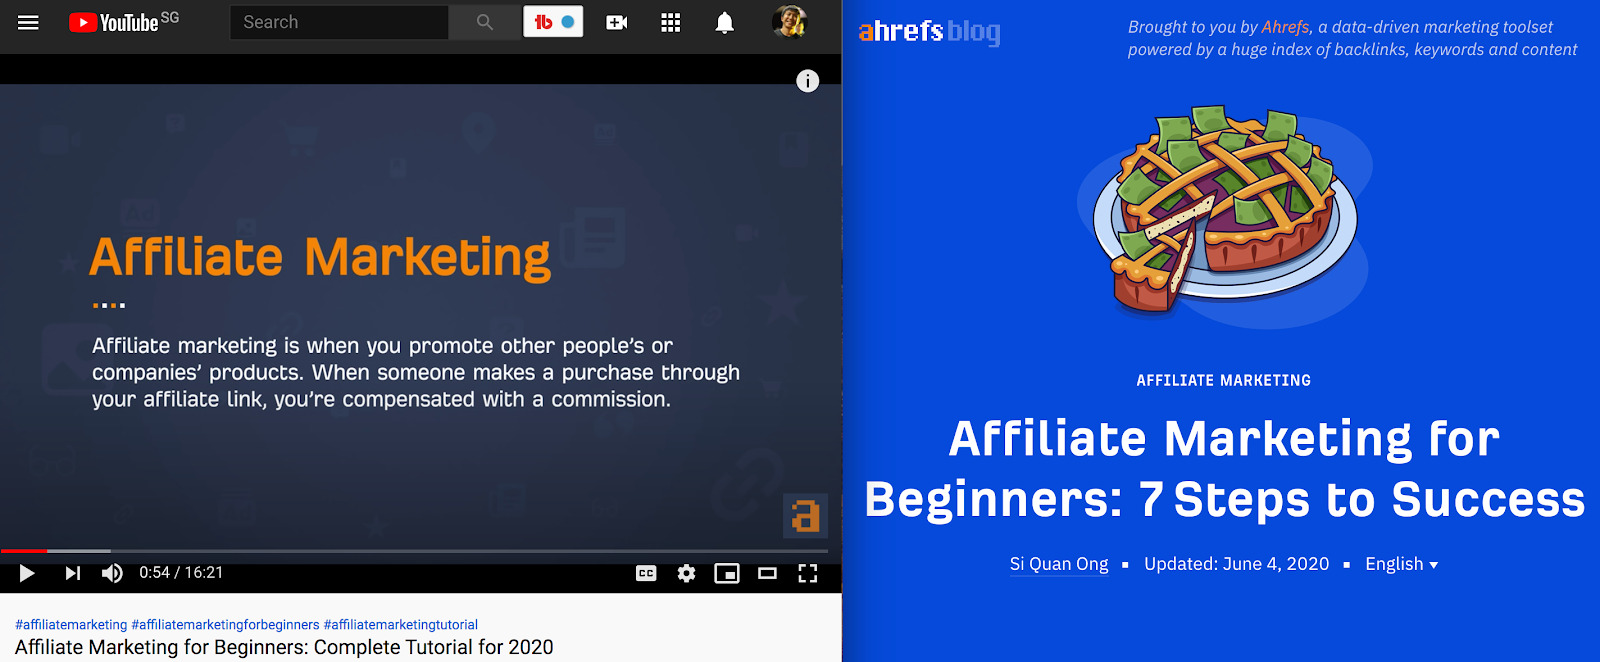 Affiliate Marketing for Beginners Complete Tutorial for 2020 YouTube and Affiliate Marketing for Beginners 7 Steps to Success